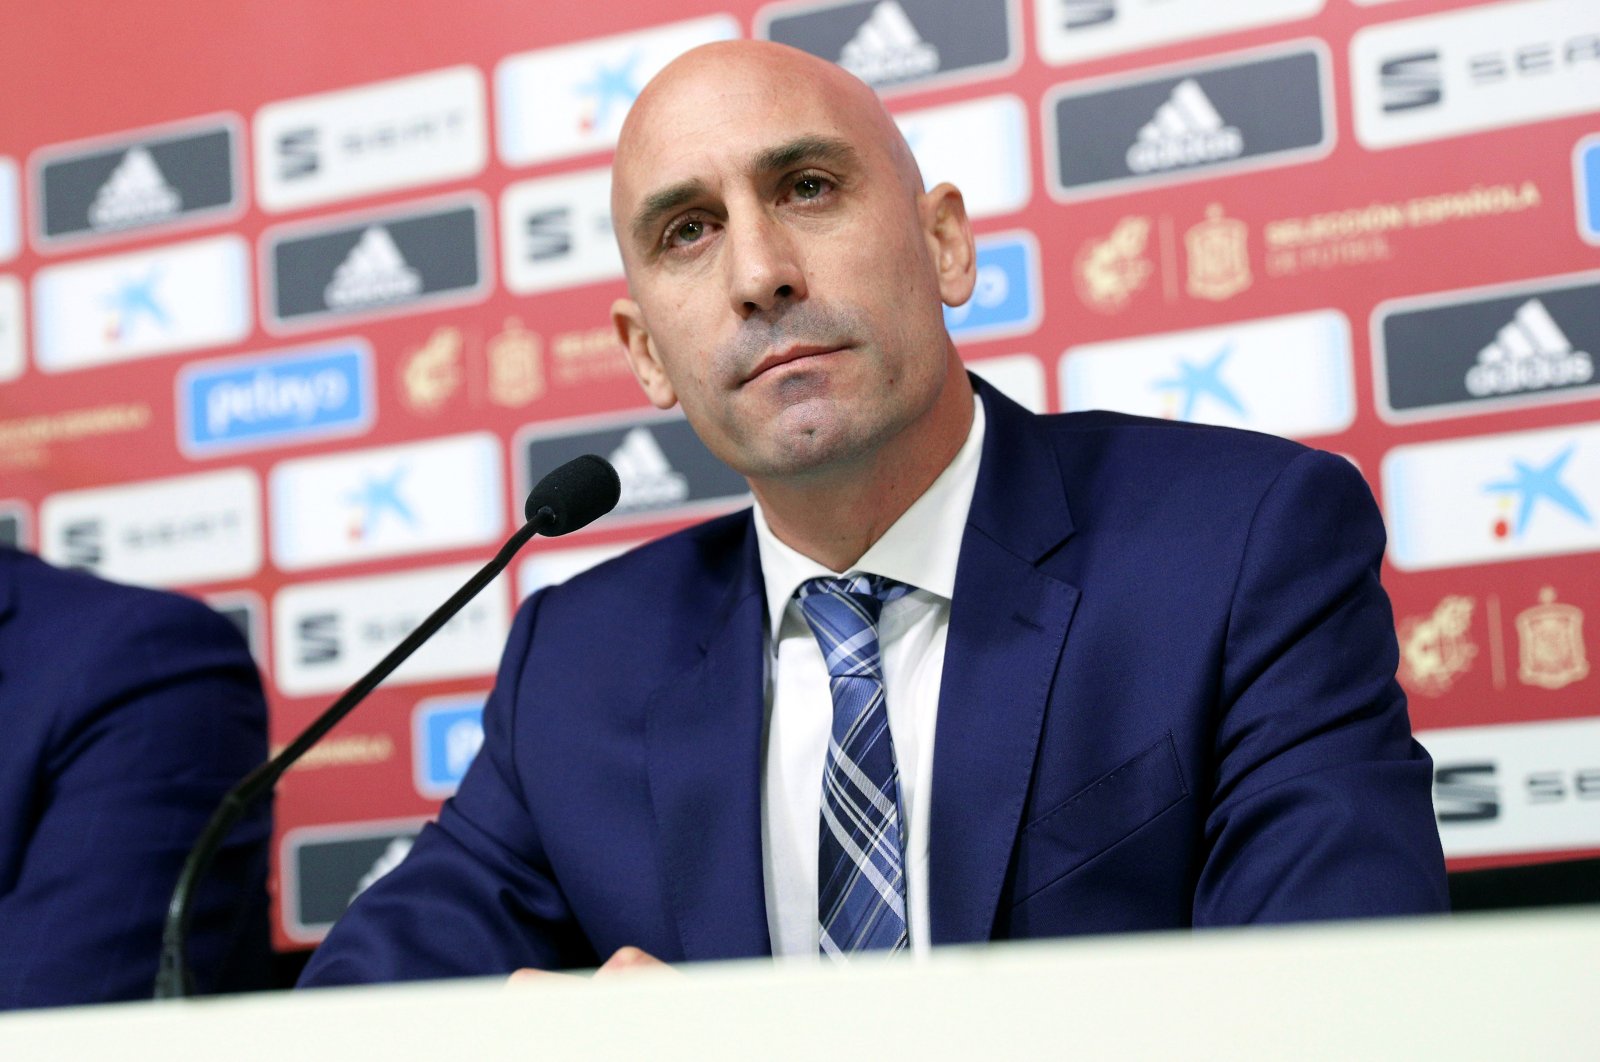 FIFA bans Spanish football chief Rubiales for 90 days over kiss